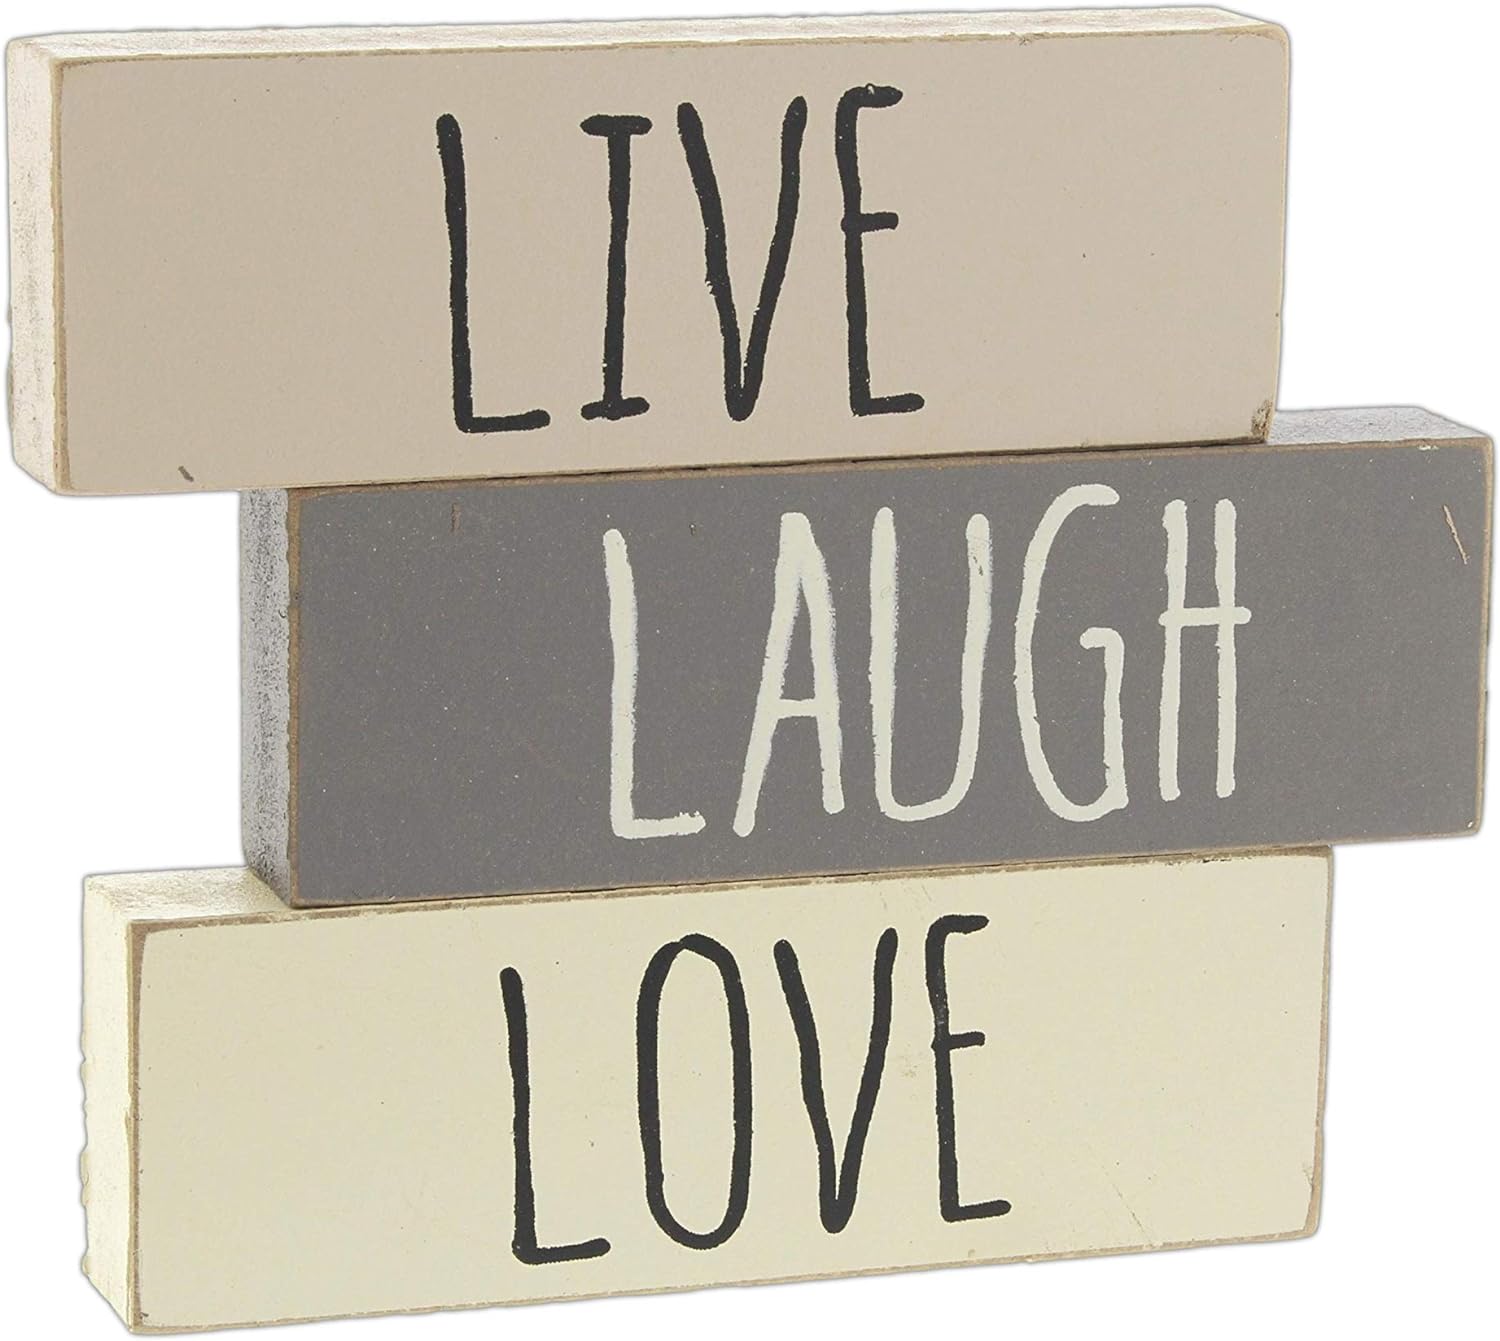 Hearthside 'Live Laugh Love' Set of 3 Inspirational Wood Block Signs :  Amazon.ca: Home